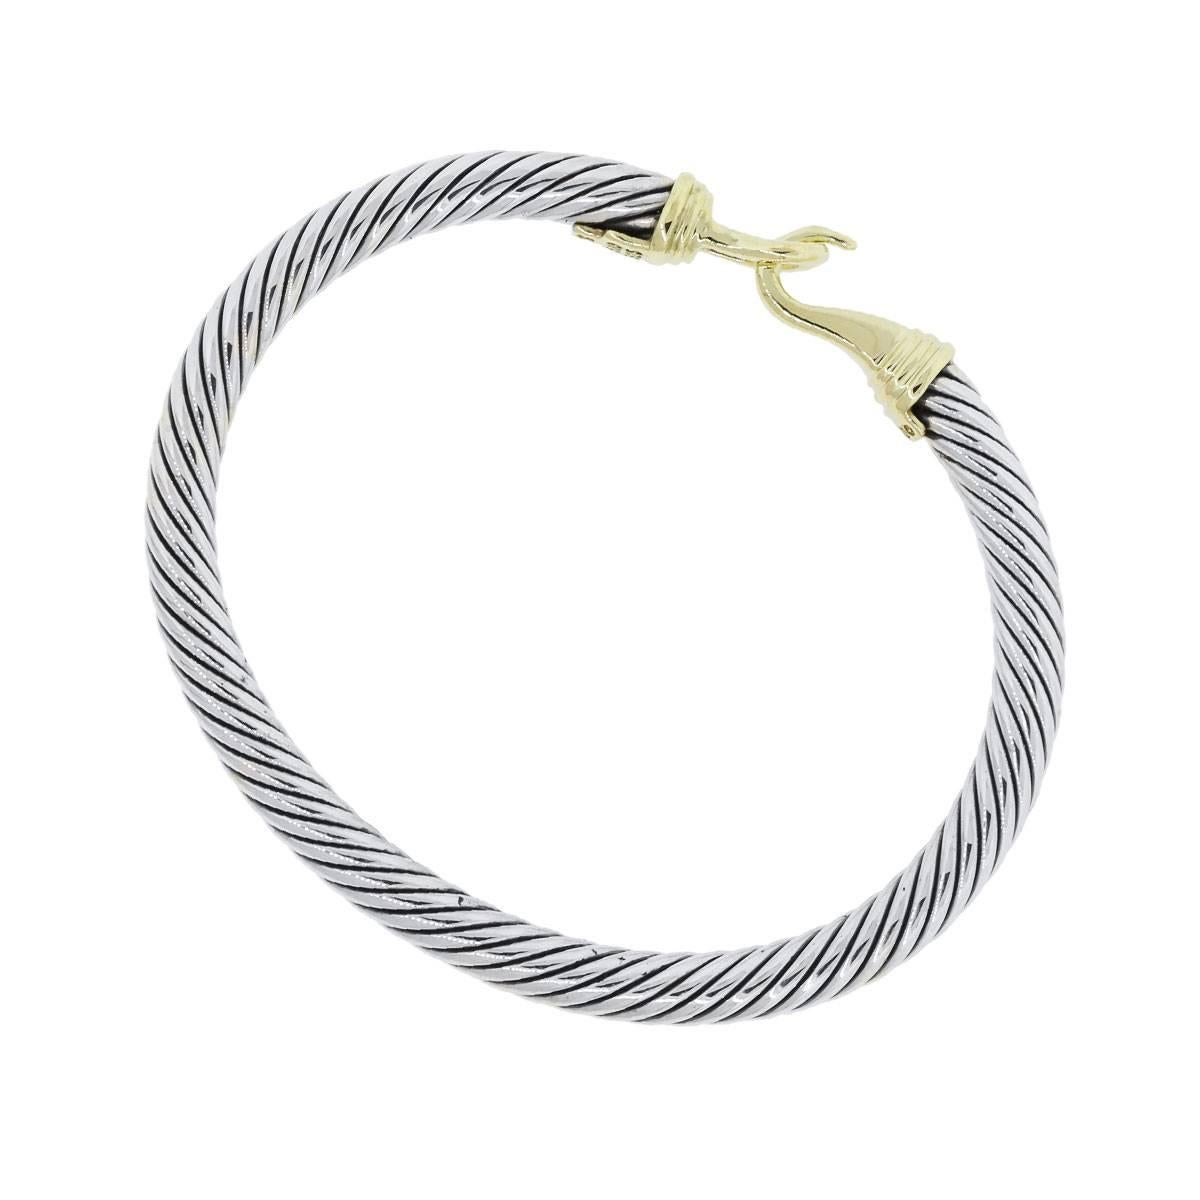 Designer: David Yurman
Material: Sterling silver and 14k yellow gold
Clasp: Hook
Total Weight: 28.9g (18.6dwt)
Bracelet Measurements: 2.5″ x 0.19″ x 2.25″. Will fit a 6″ wrist.
Additional Details: Item comes complete with a Raymond Lee Jewelers